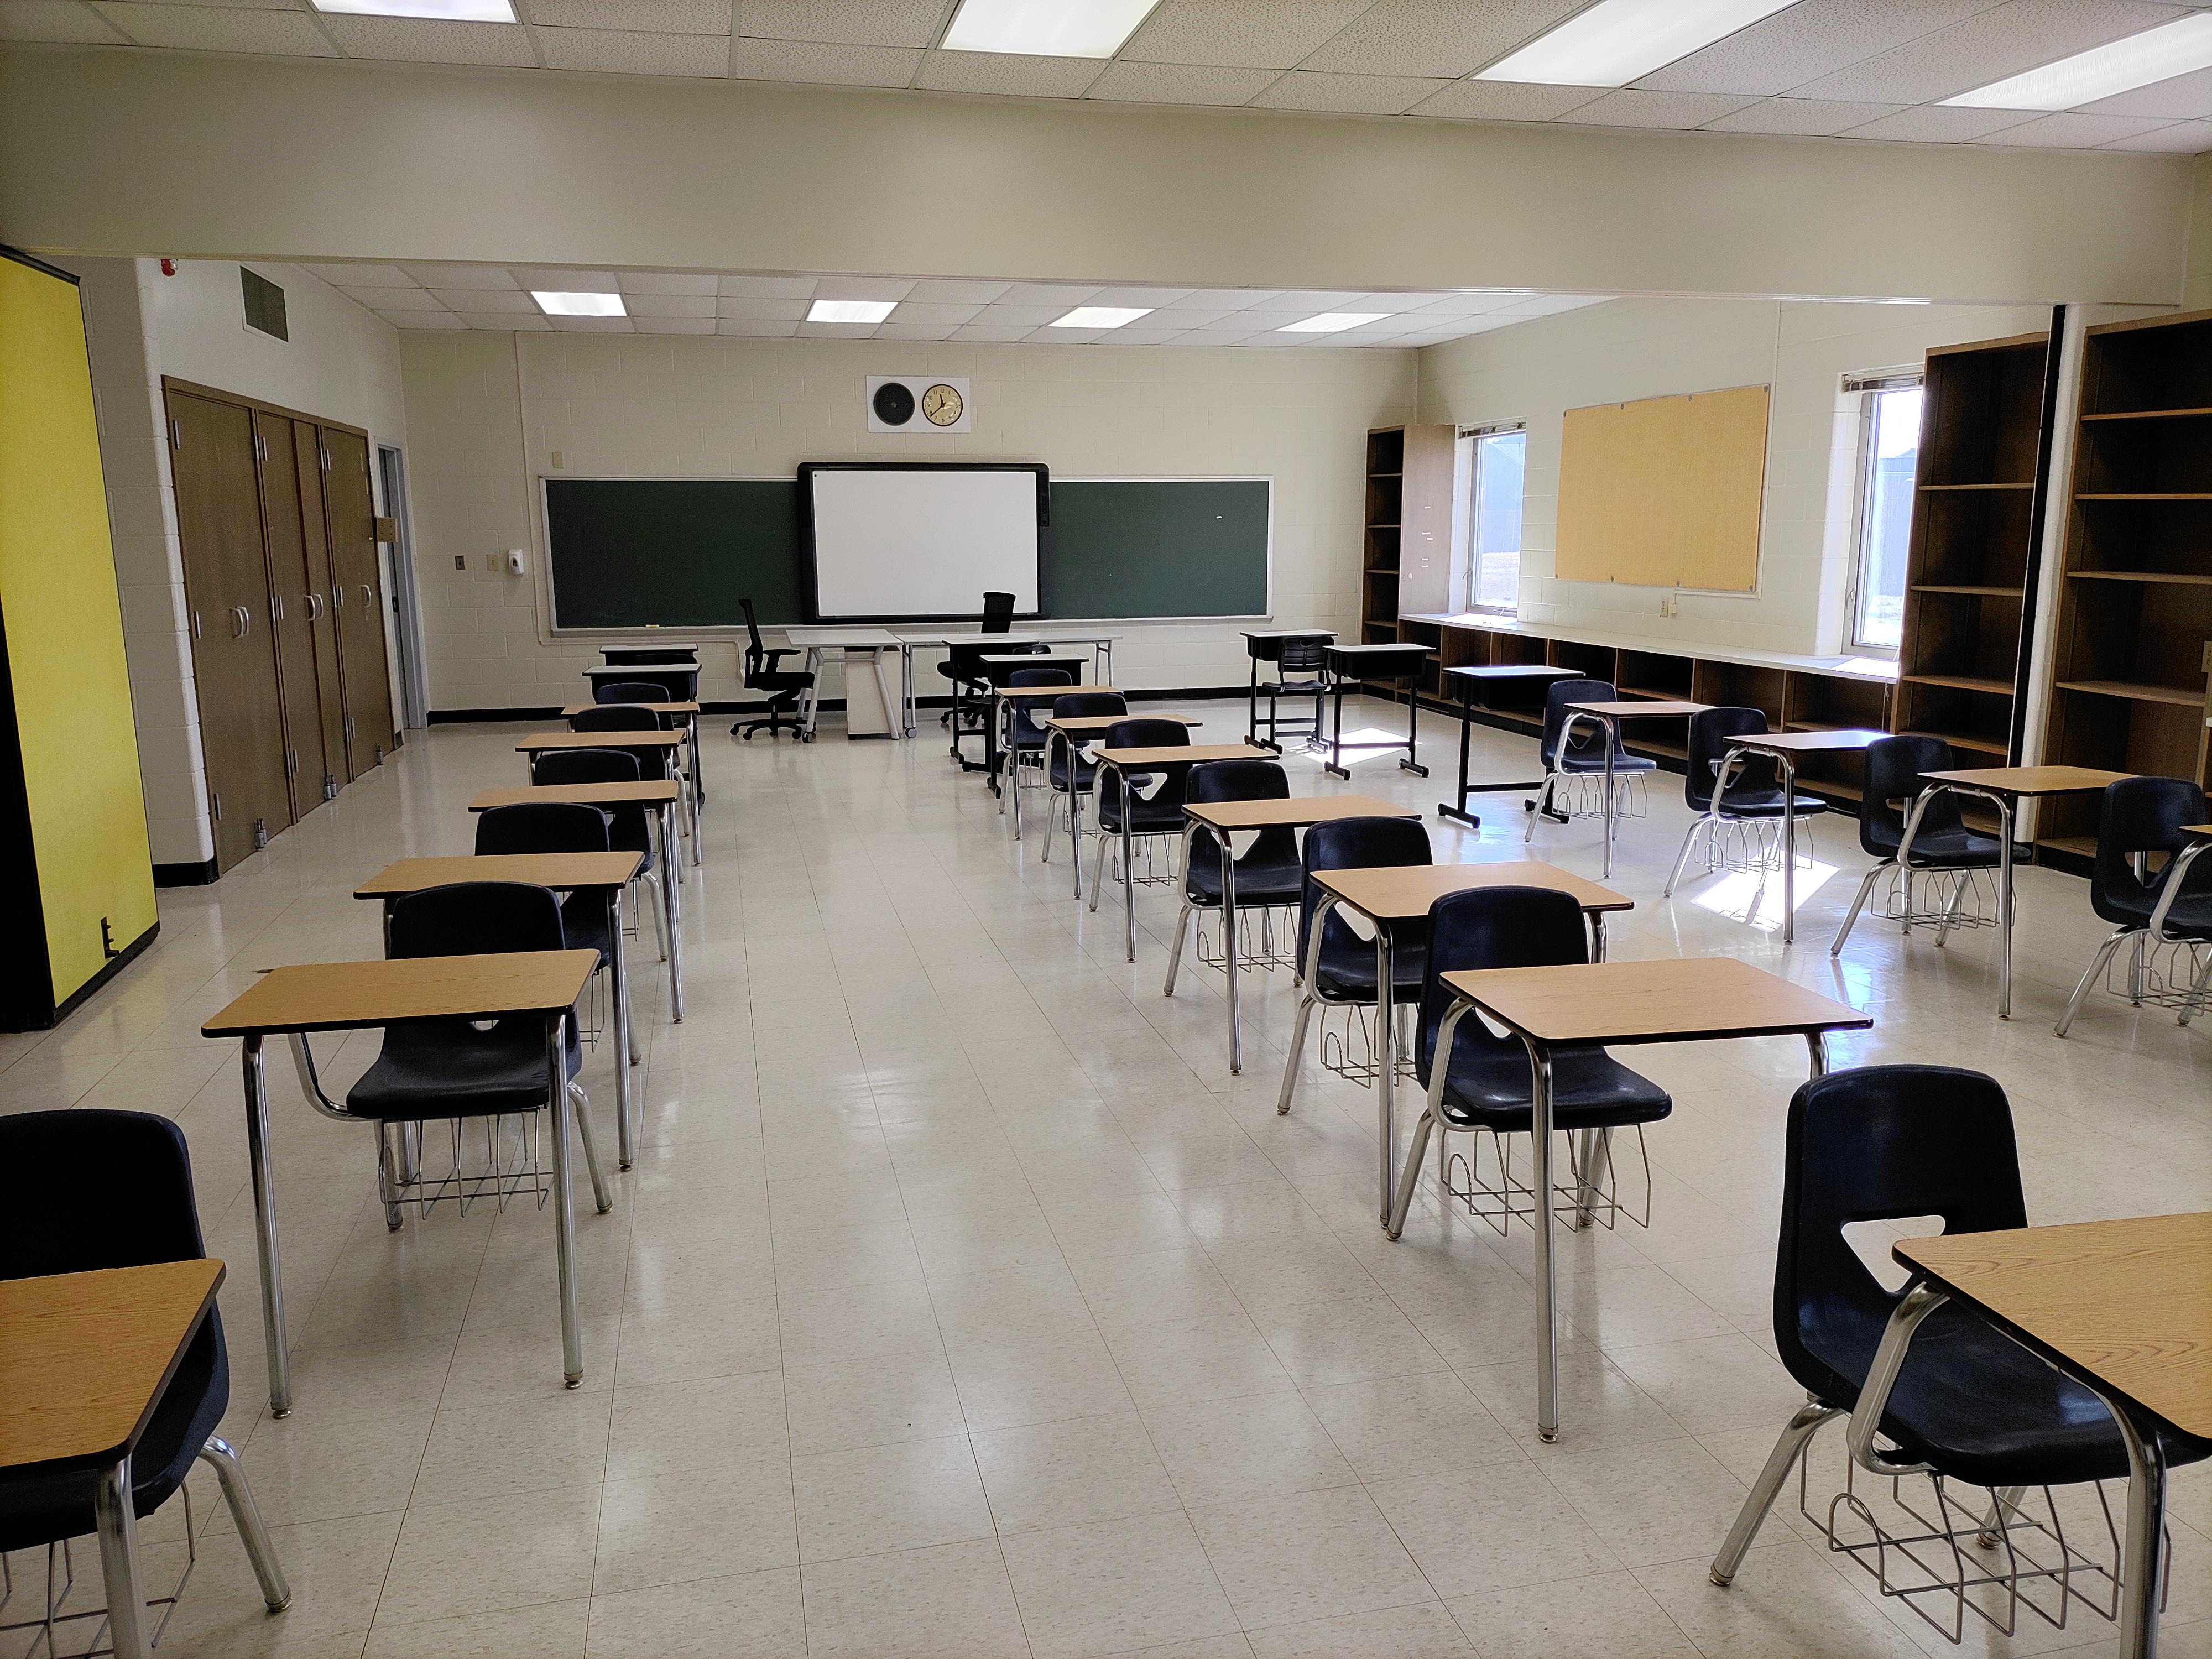 Larger Class room